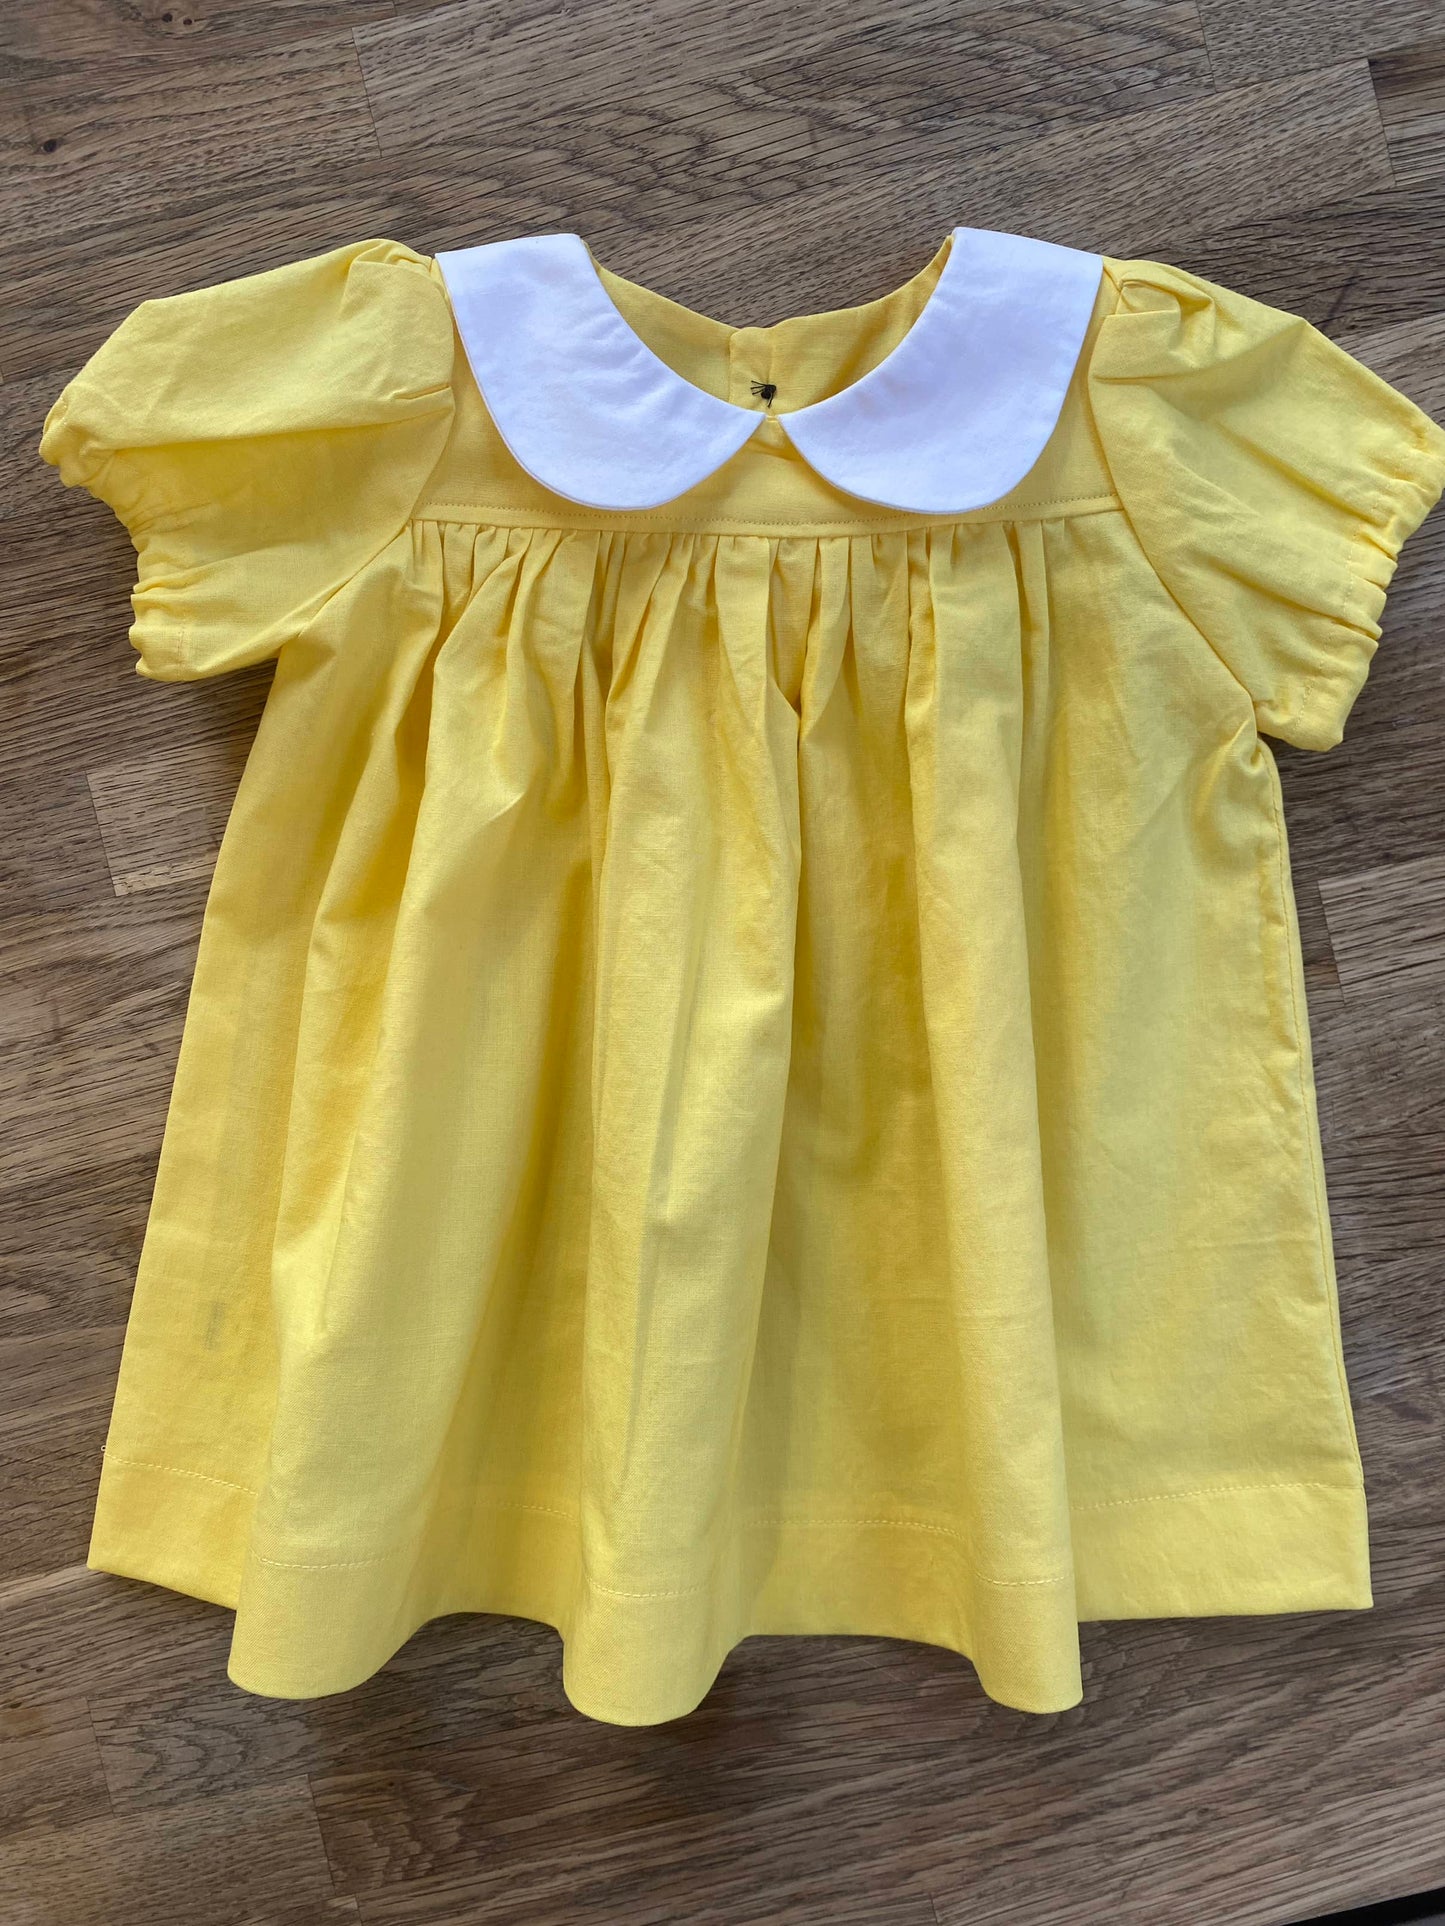 Little Yellow Dress (MADE TO ORDER)